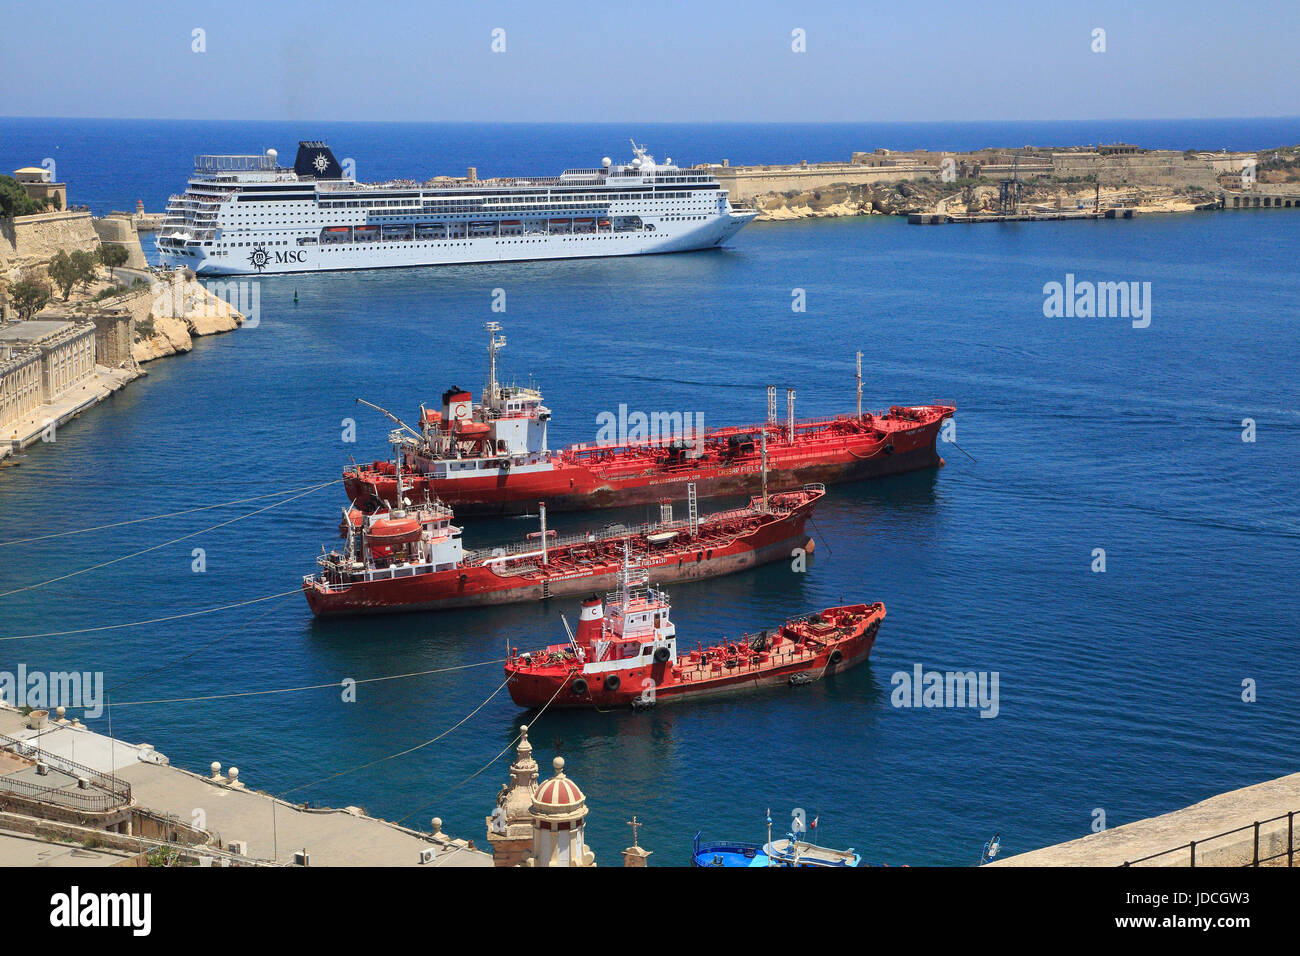 Merchant shipping and cruise ship arriving in Grand Harbour, Valletta, Malta Stock Photo